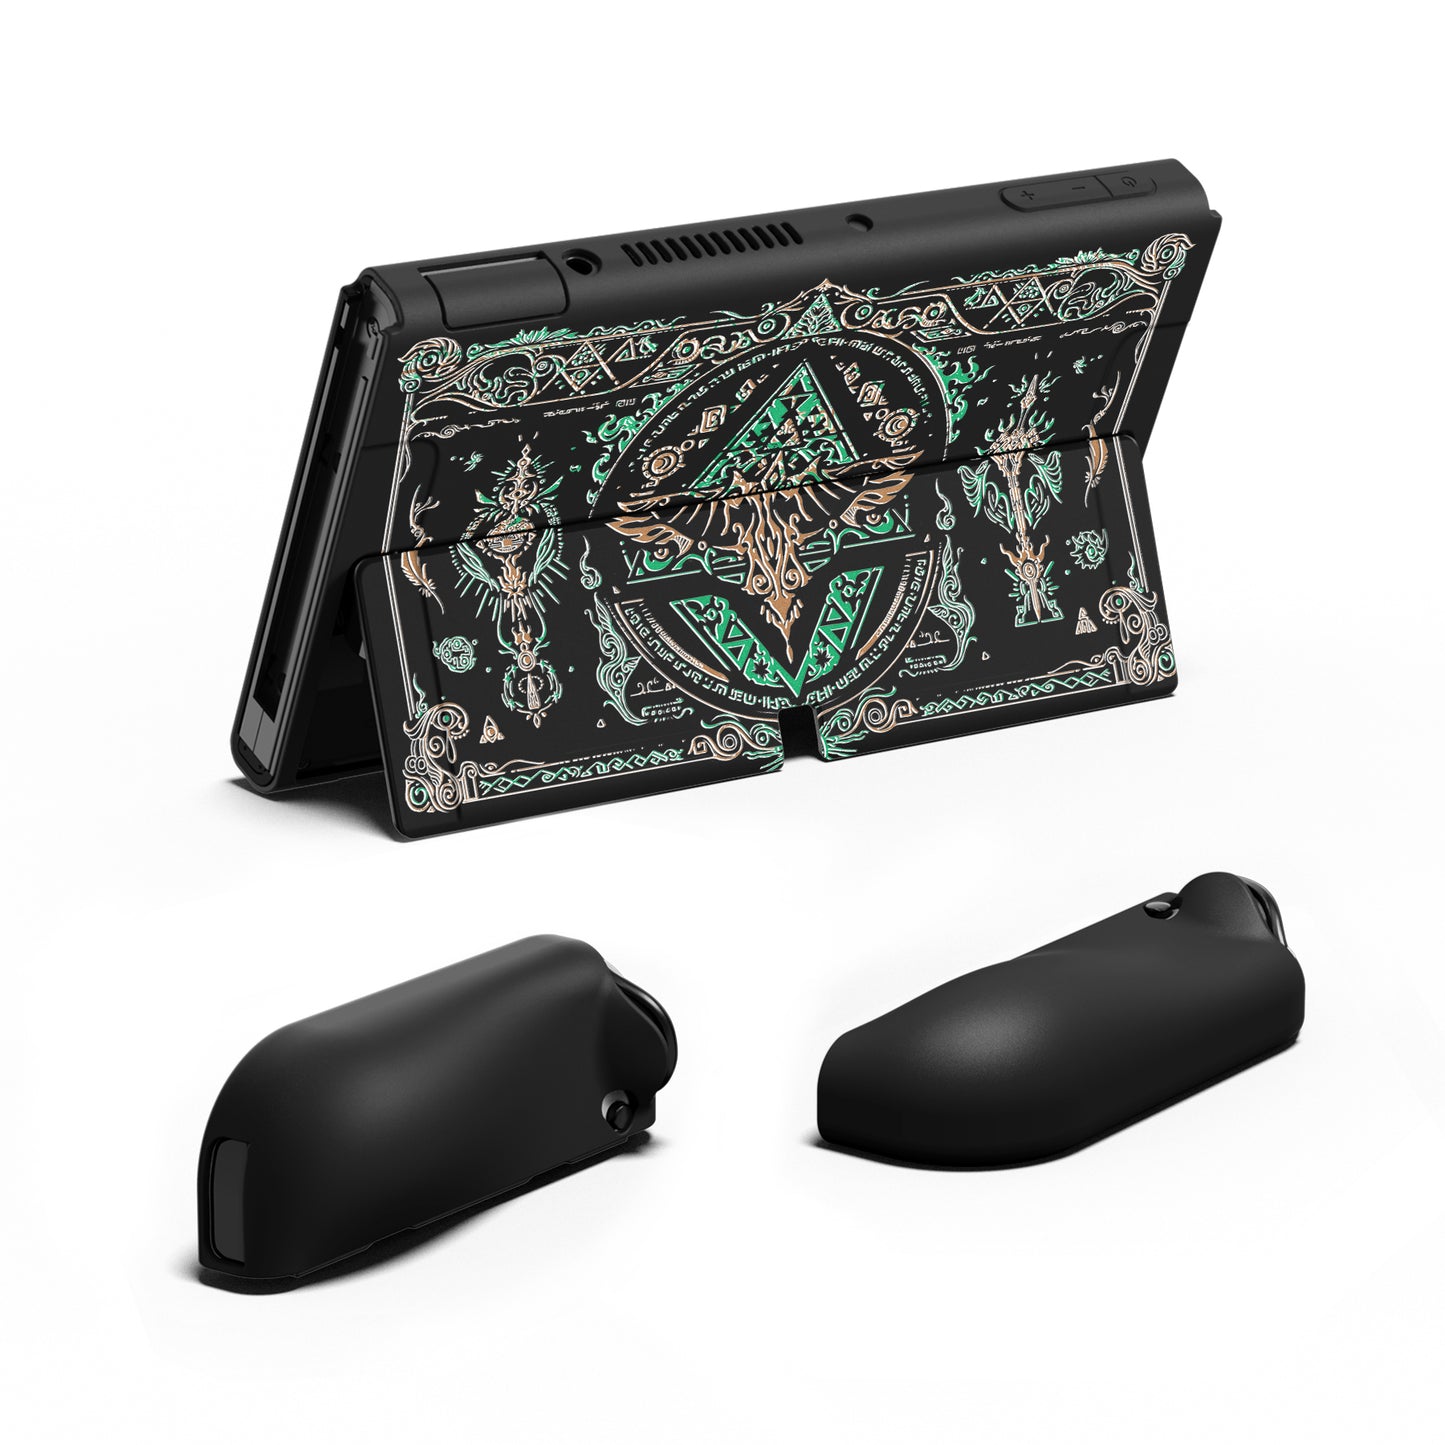 PlayVital ZealProtect Soft Protective Case for Switch OLED, Flexible Protector Joycon Grip Cover for Switch OLED with Thumb Grip Caps & ABXY Direction Button Caps - Totem of Kingdom - XSOYV6028 playvital